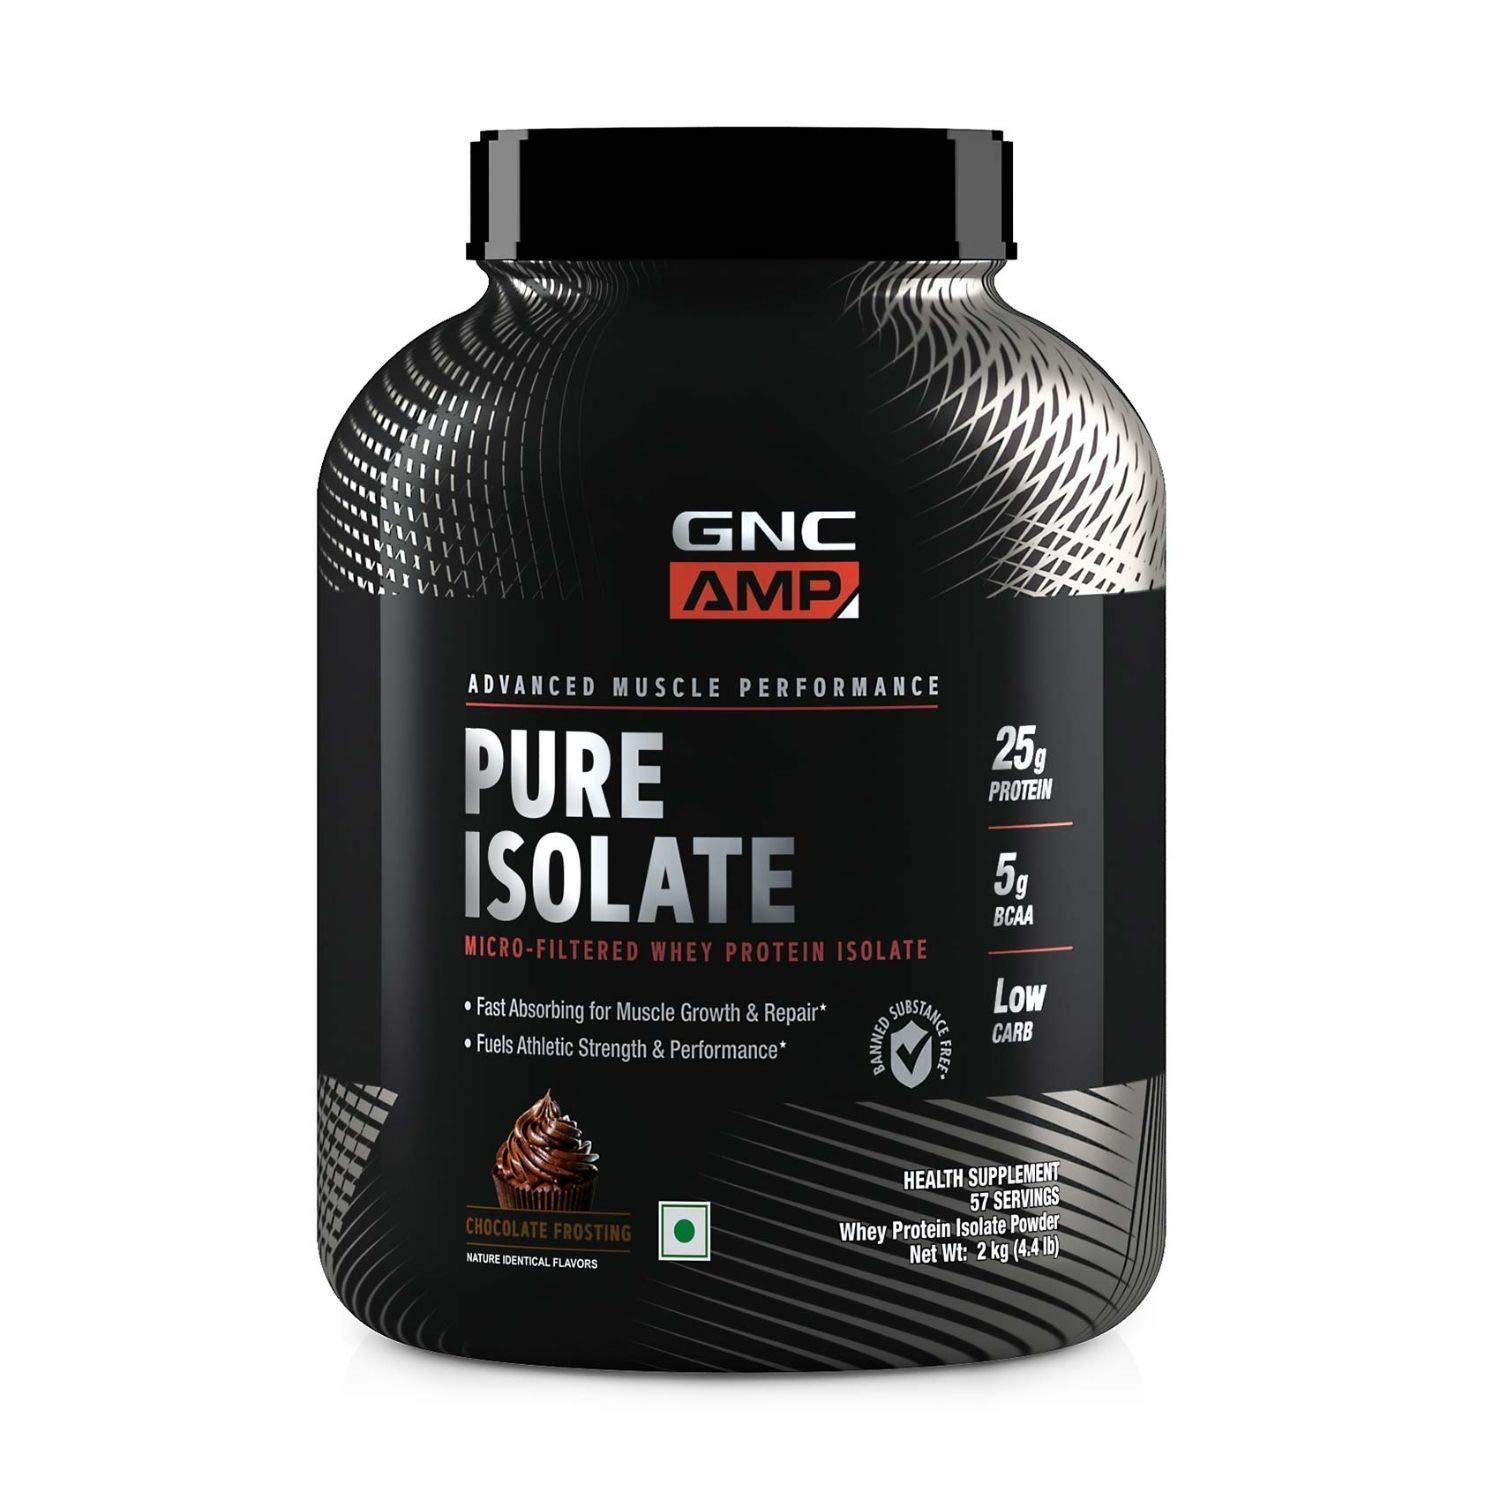 GNC AMP Pure Isolate - 4.4 lbs, 2 kg (Chocolate Frosting) - The Muscle Kart.com